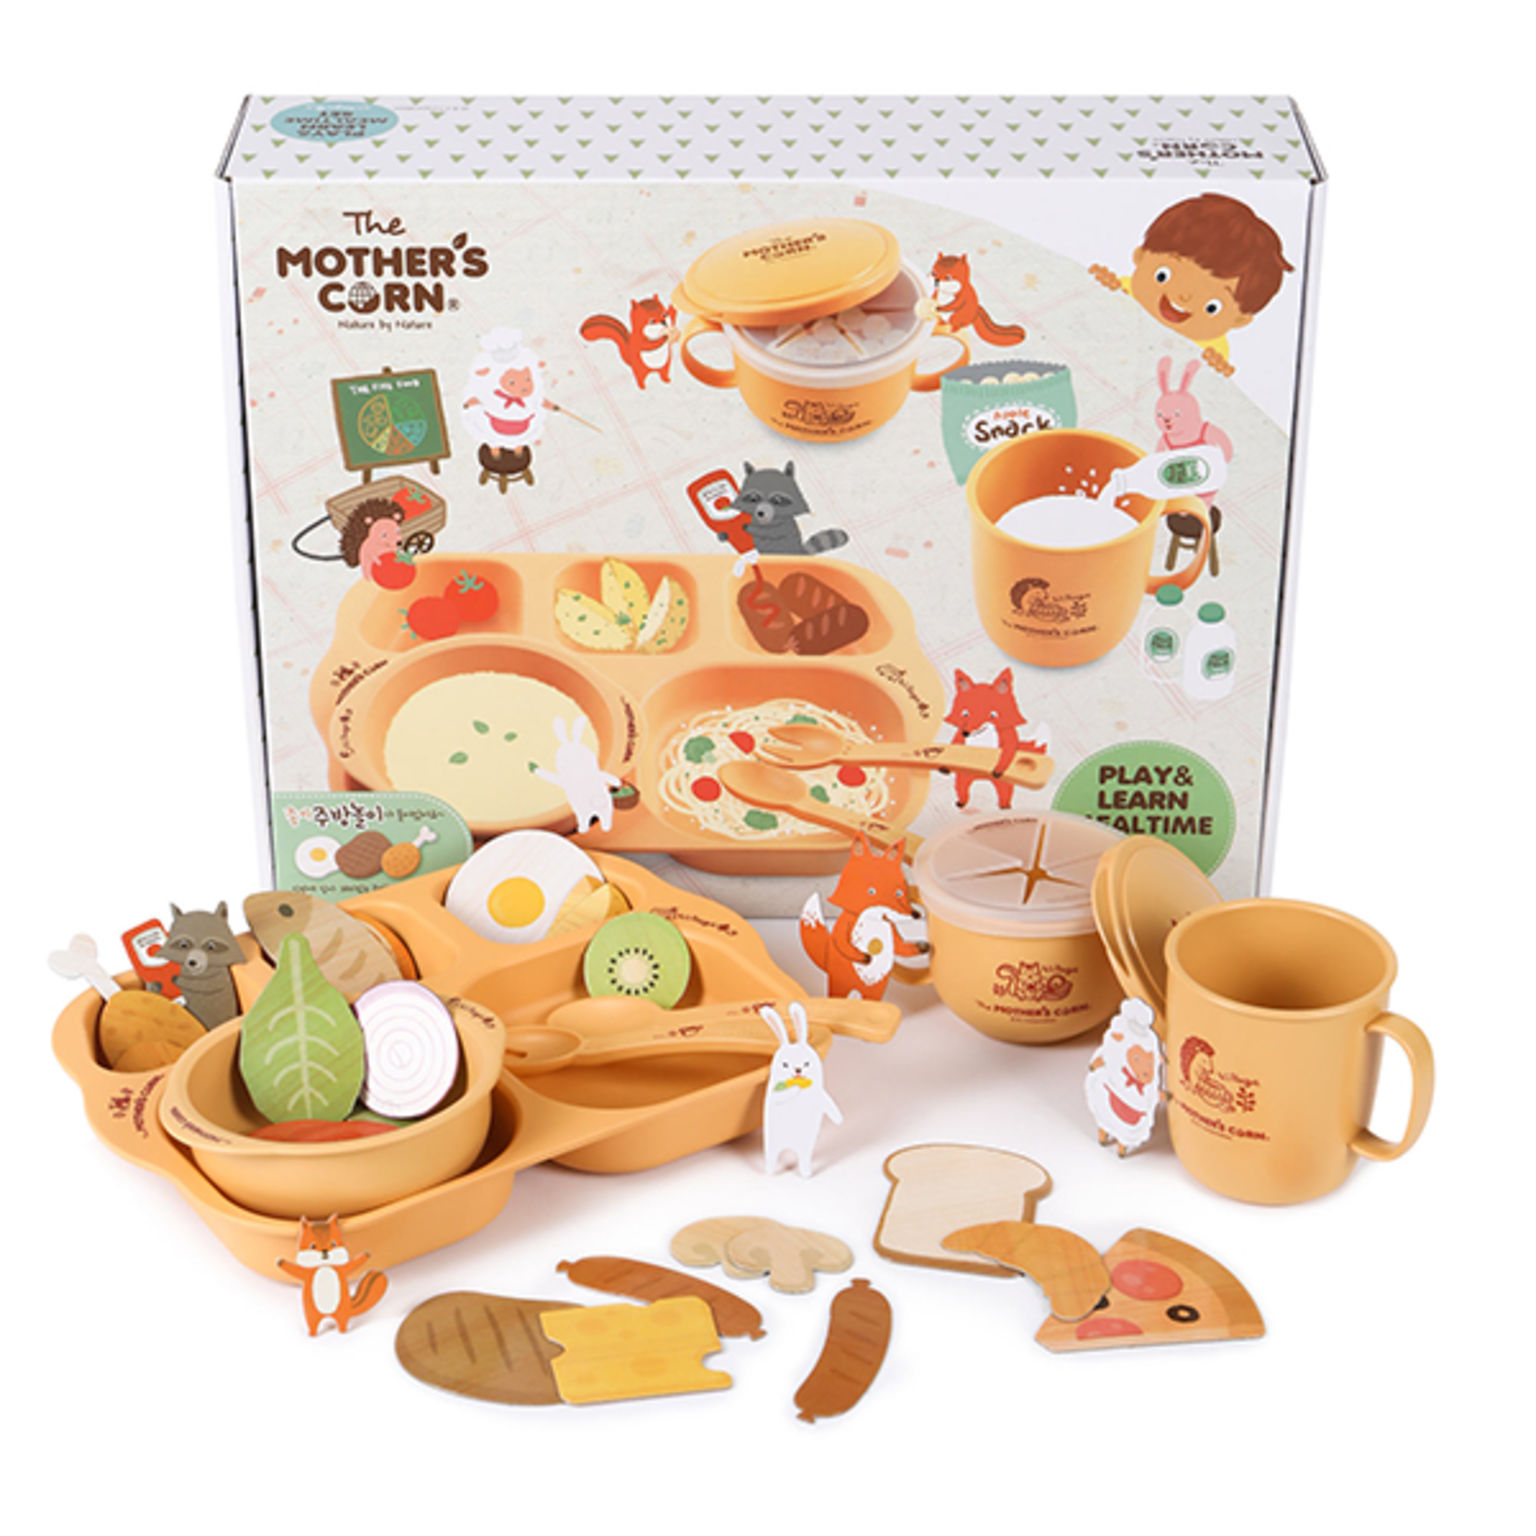 PLAY&LEARN MEALTIME SET